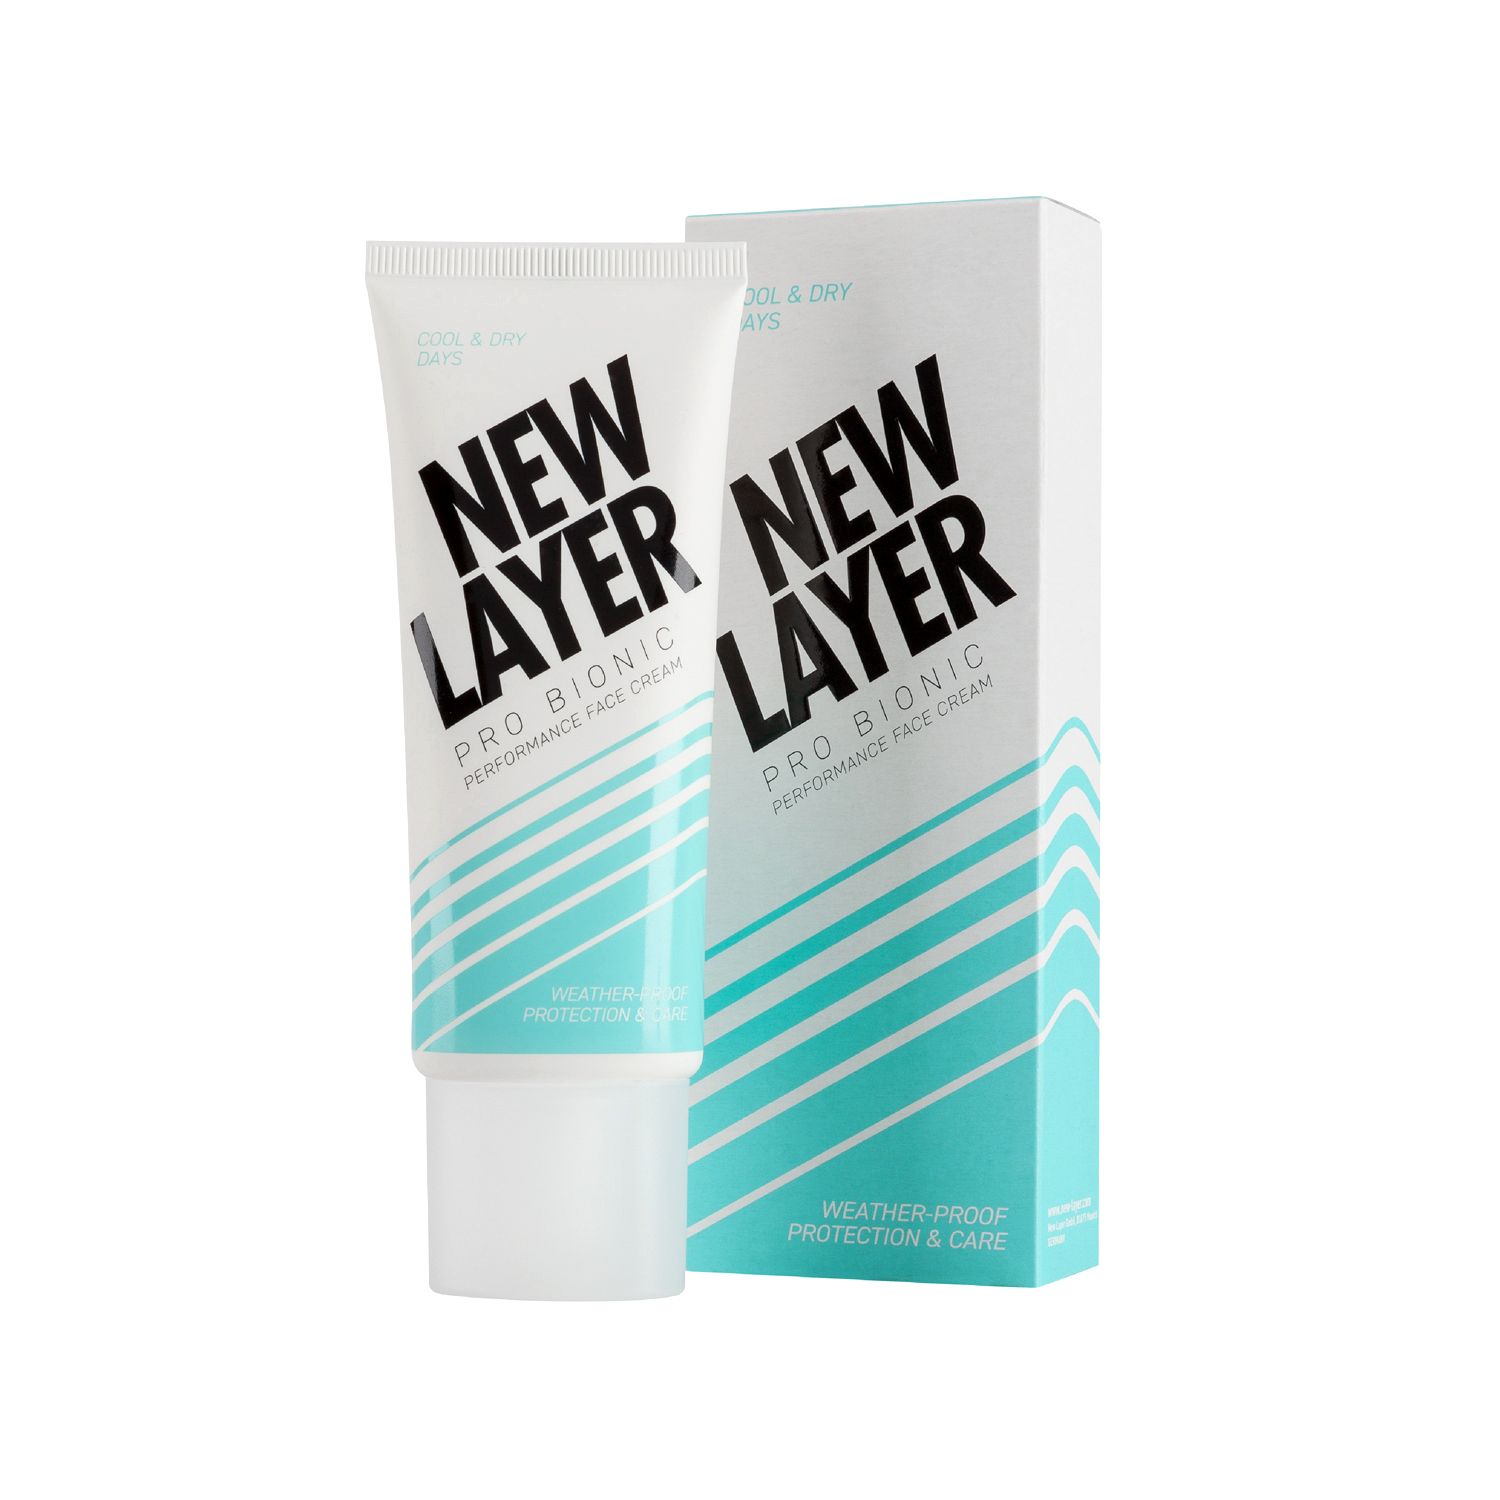 NEW Layer Pro Bionic Performance Gesichtscreme Cool & Dry Days